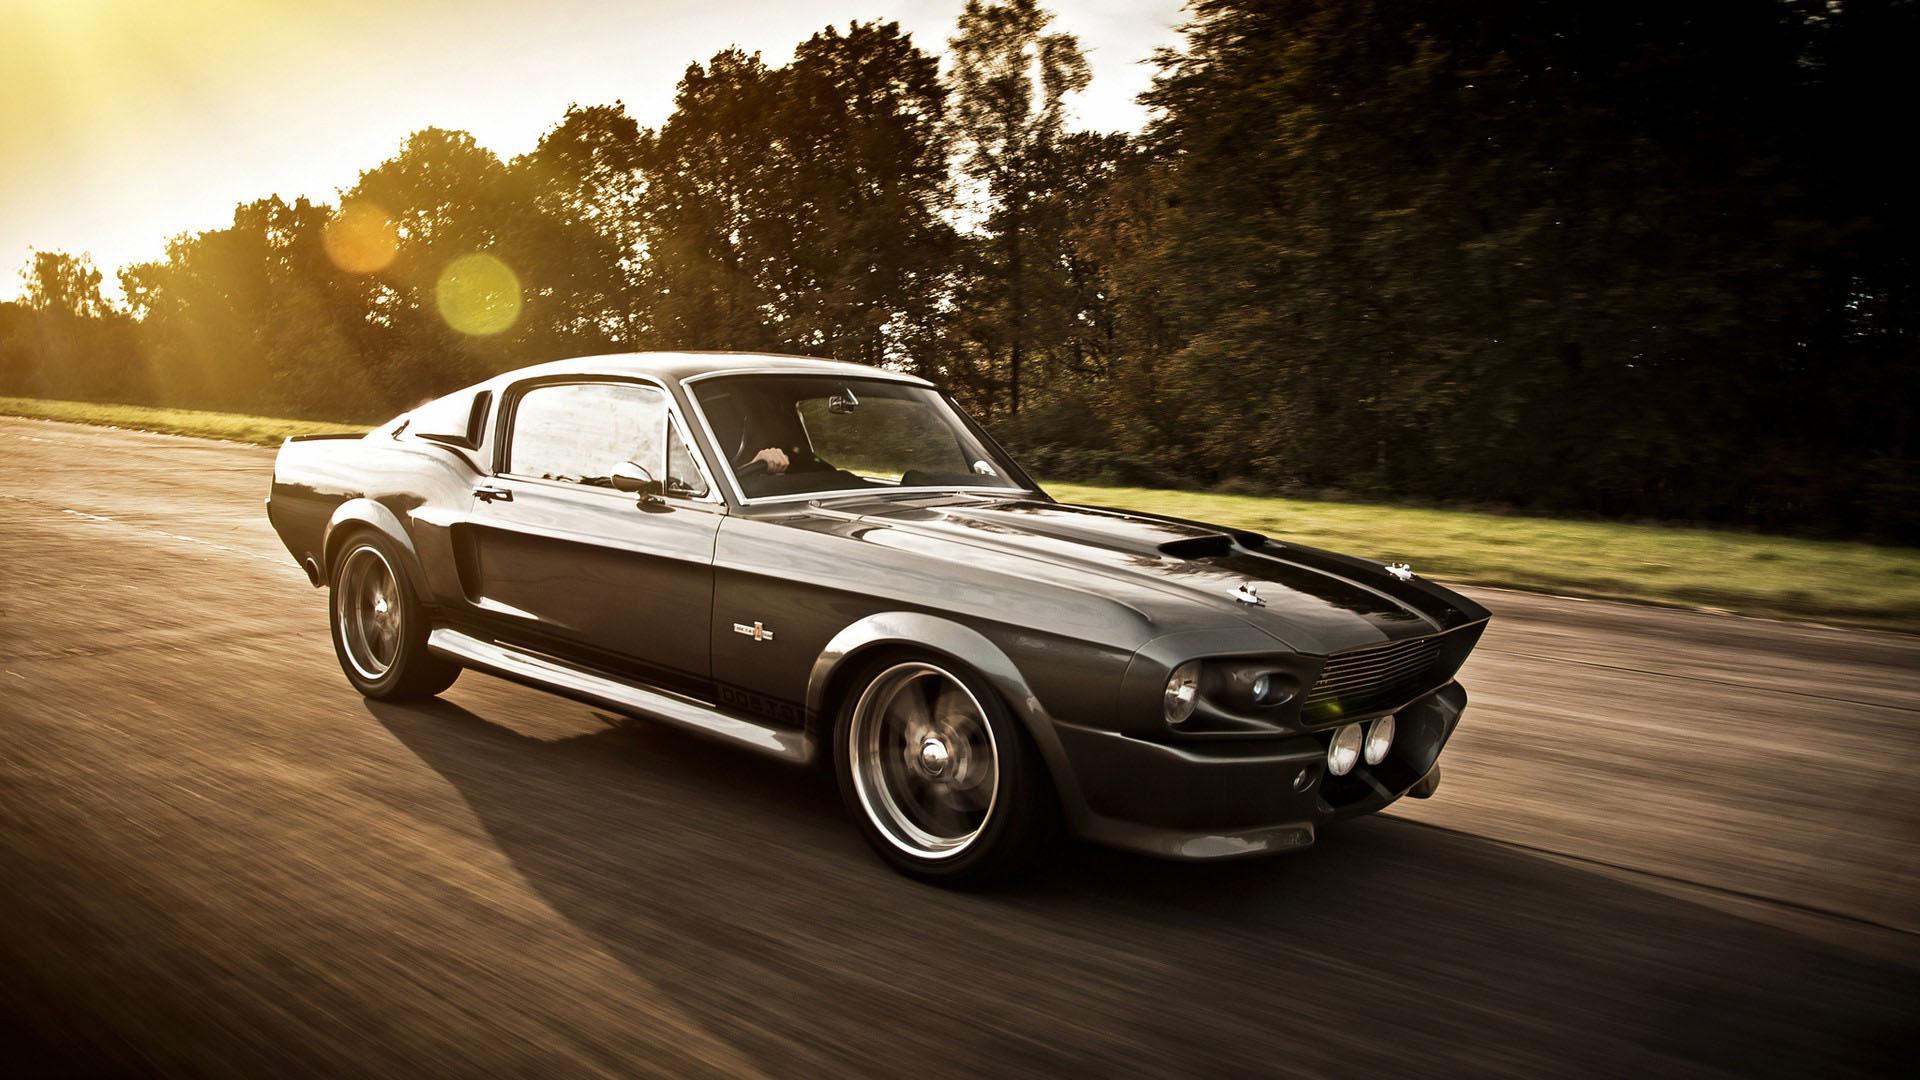 Download Classic Ford Mustang Wallpaper HD All About Mustang